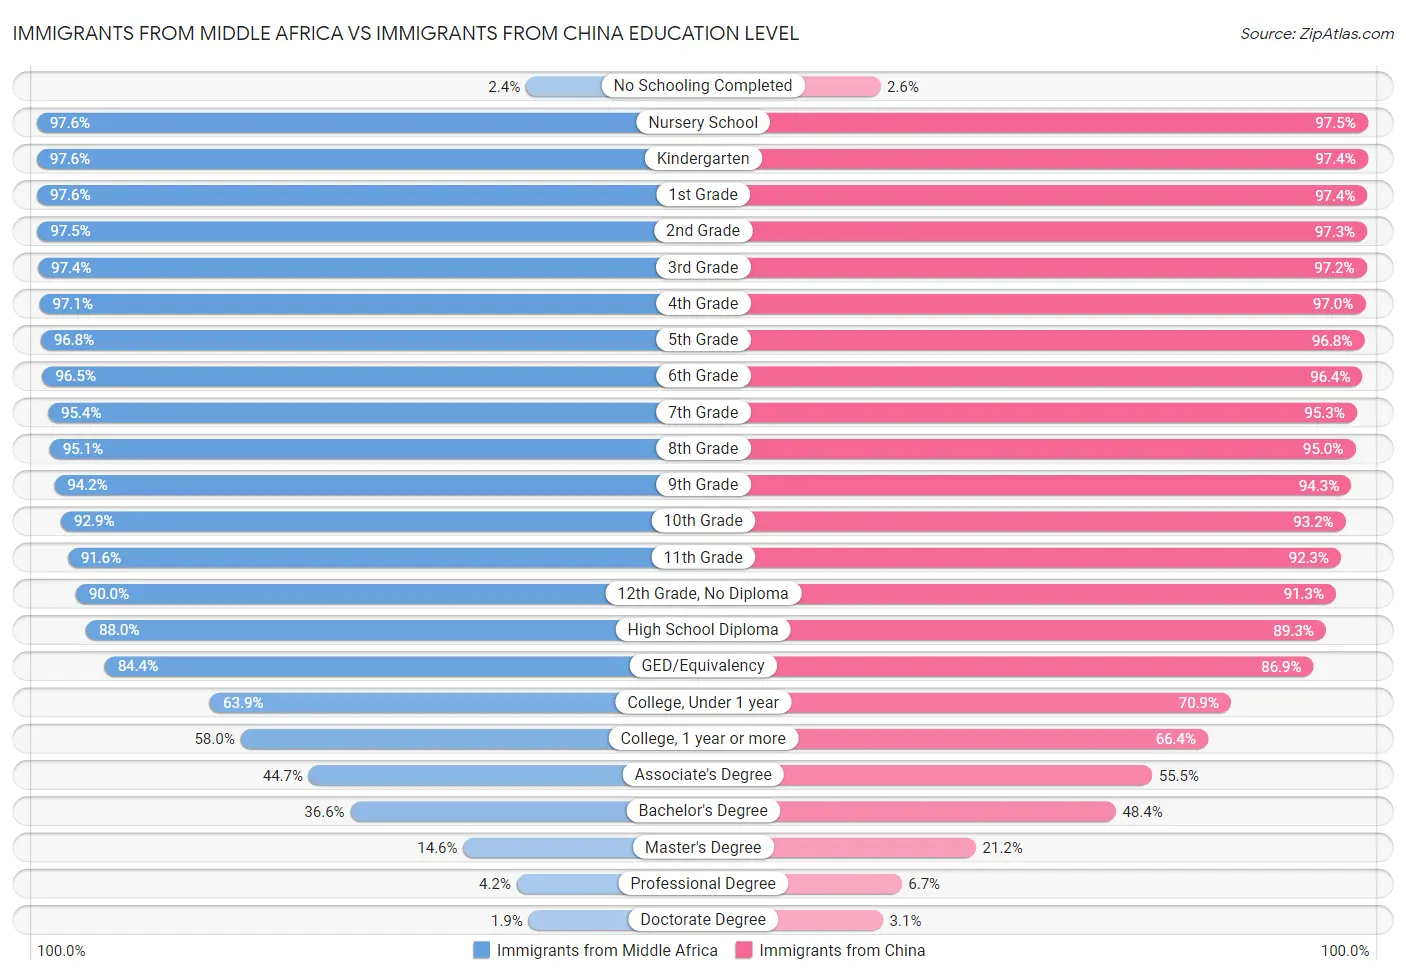 Immigrants from Middle Africa vs Immigrants from China Education Level